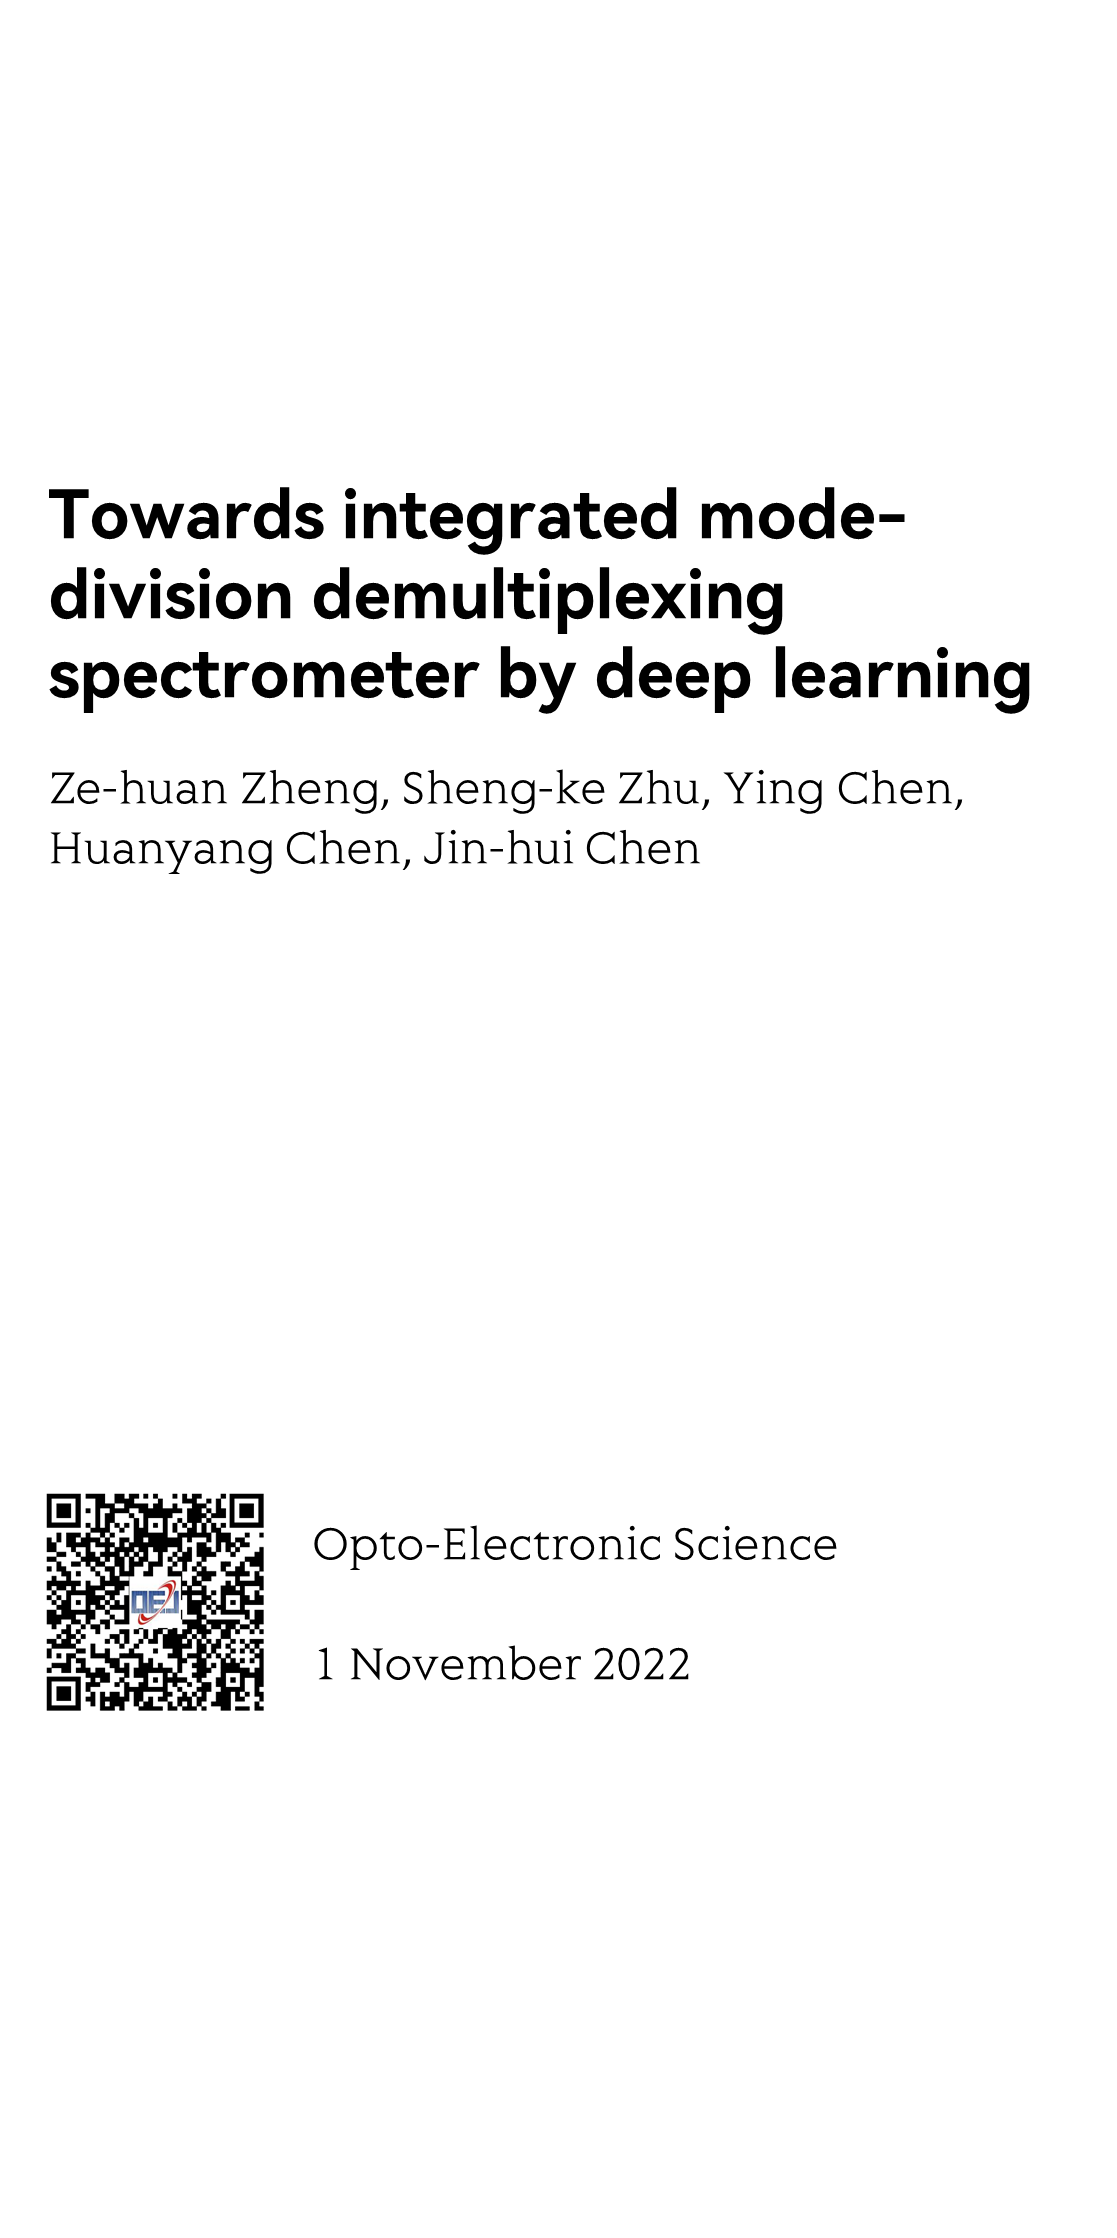 Towards integrated mode-division demultiplexing spectrometer by deep learning_1